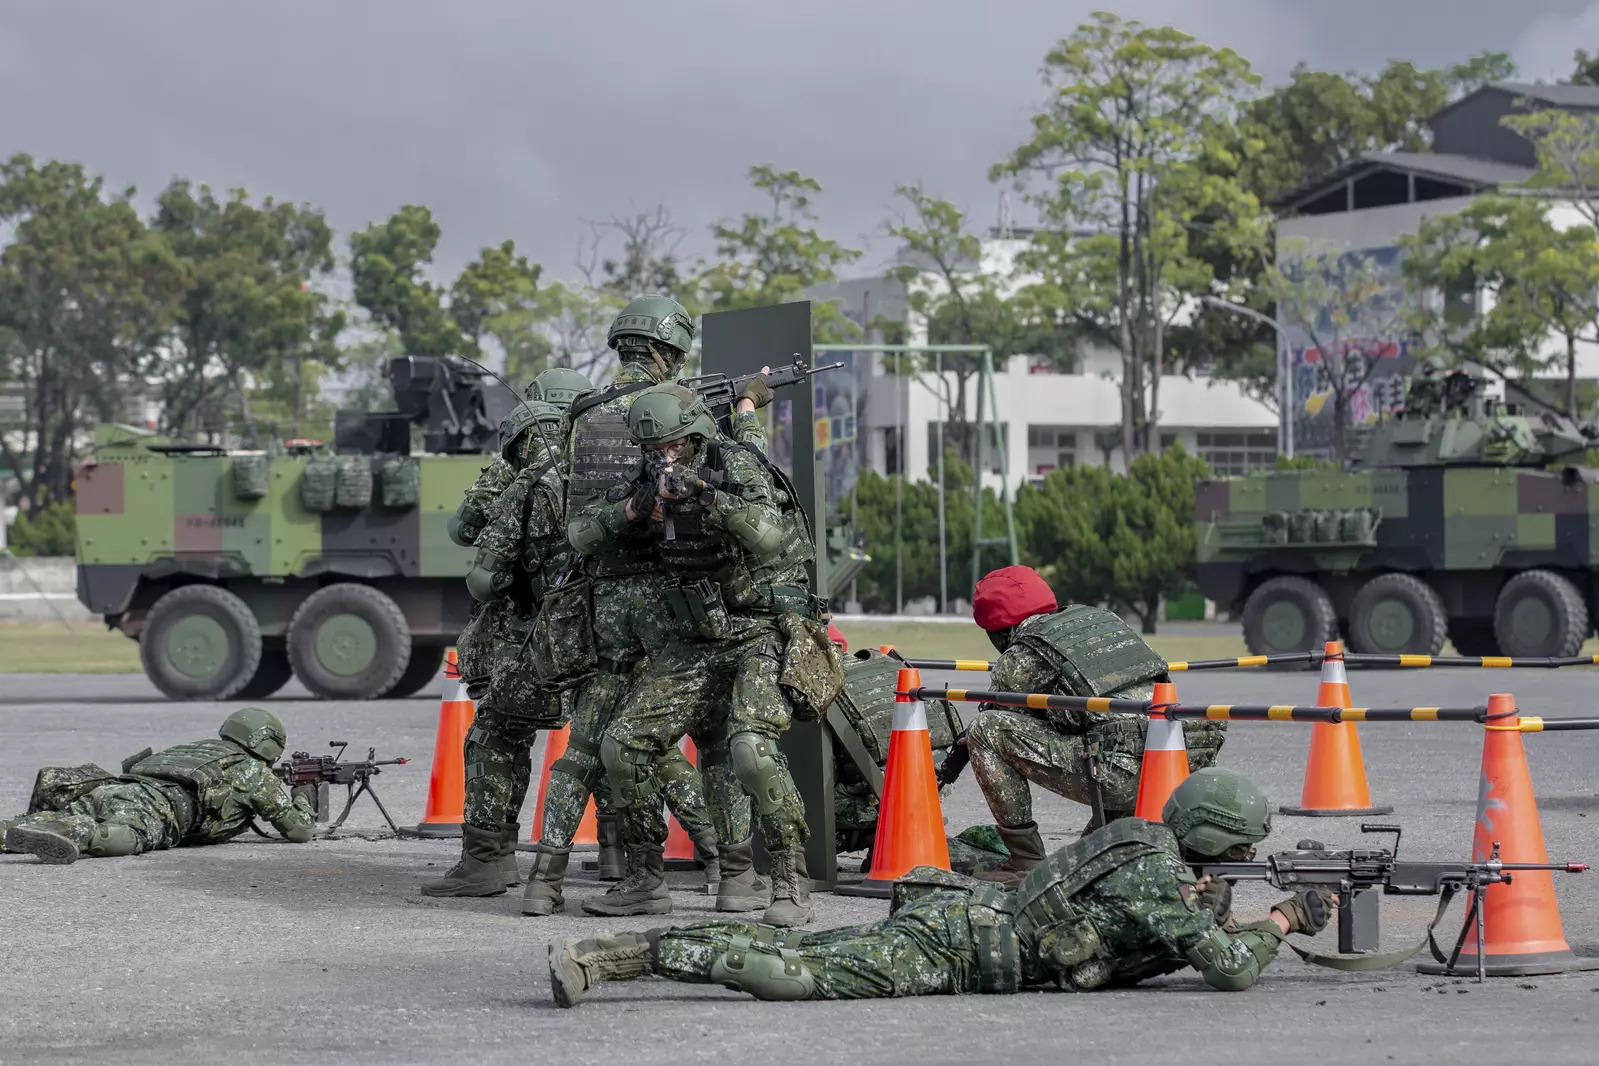 In this photo released by the Taiwan Presidential Office, soldiers take part in a drill during a visit by Taiwan's President Tsai Ing-wen, at a military base in Chiayi in southwestern Taiwan.